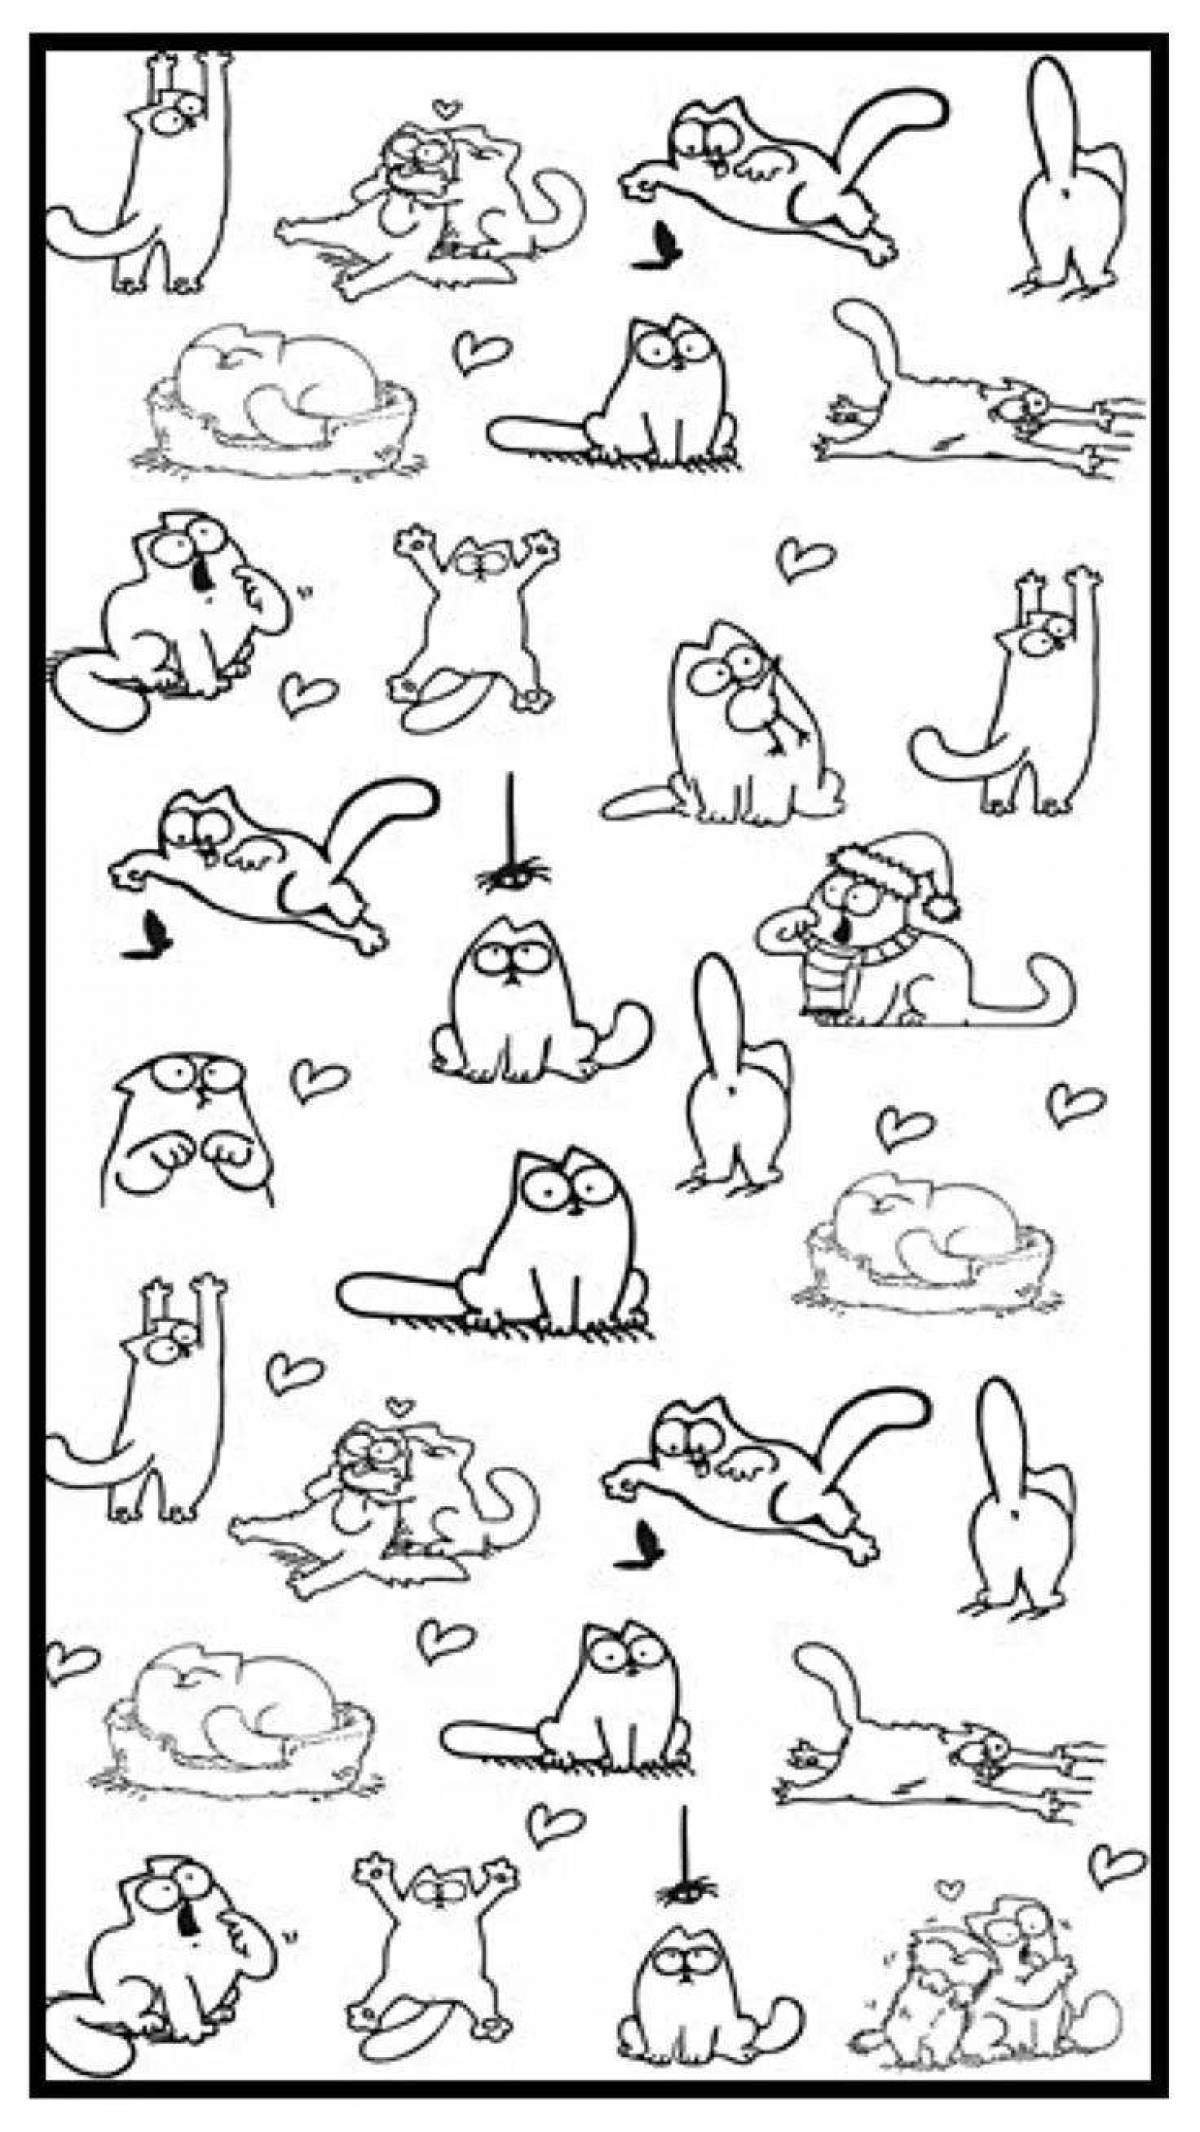 Fluffy cat sticker coloring page